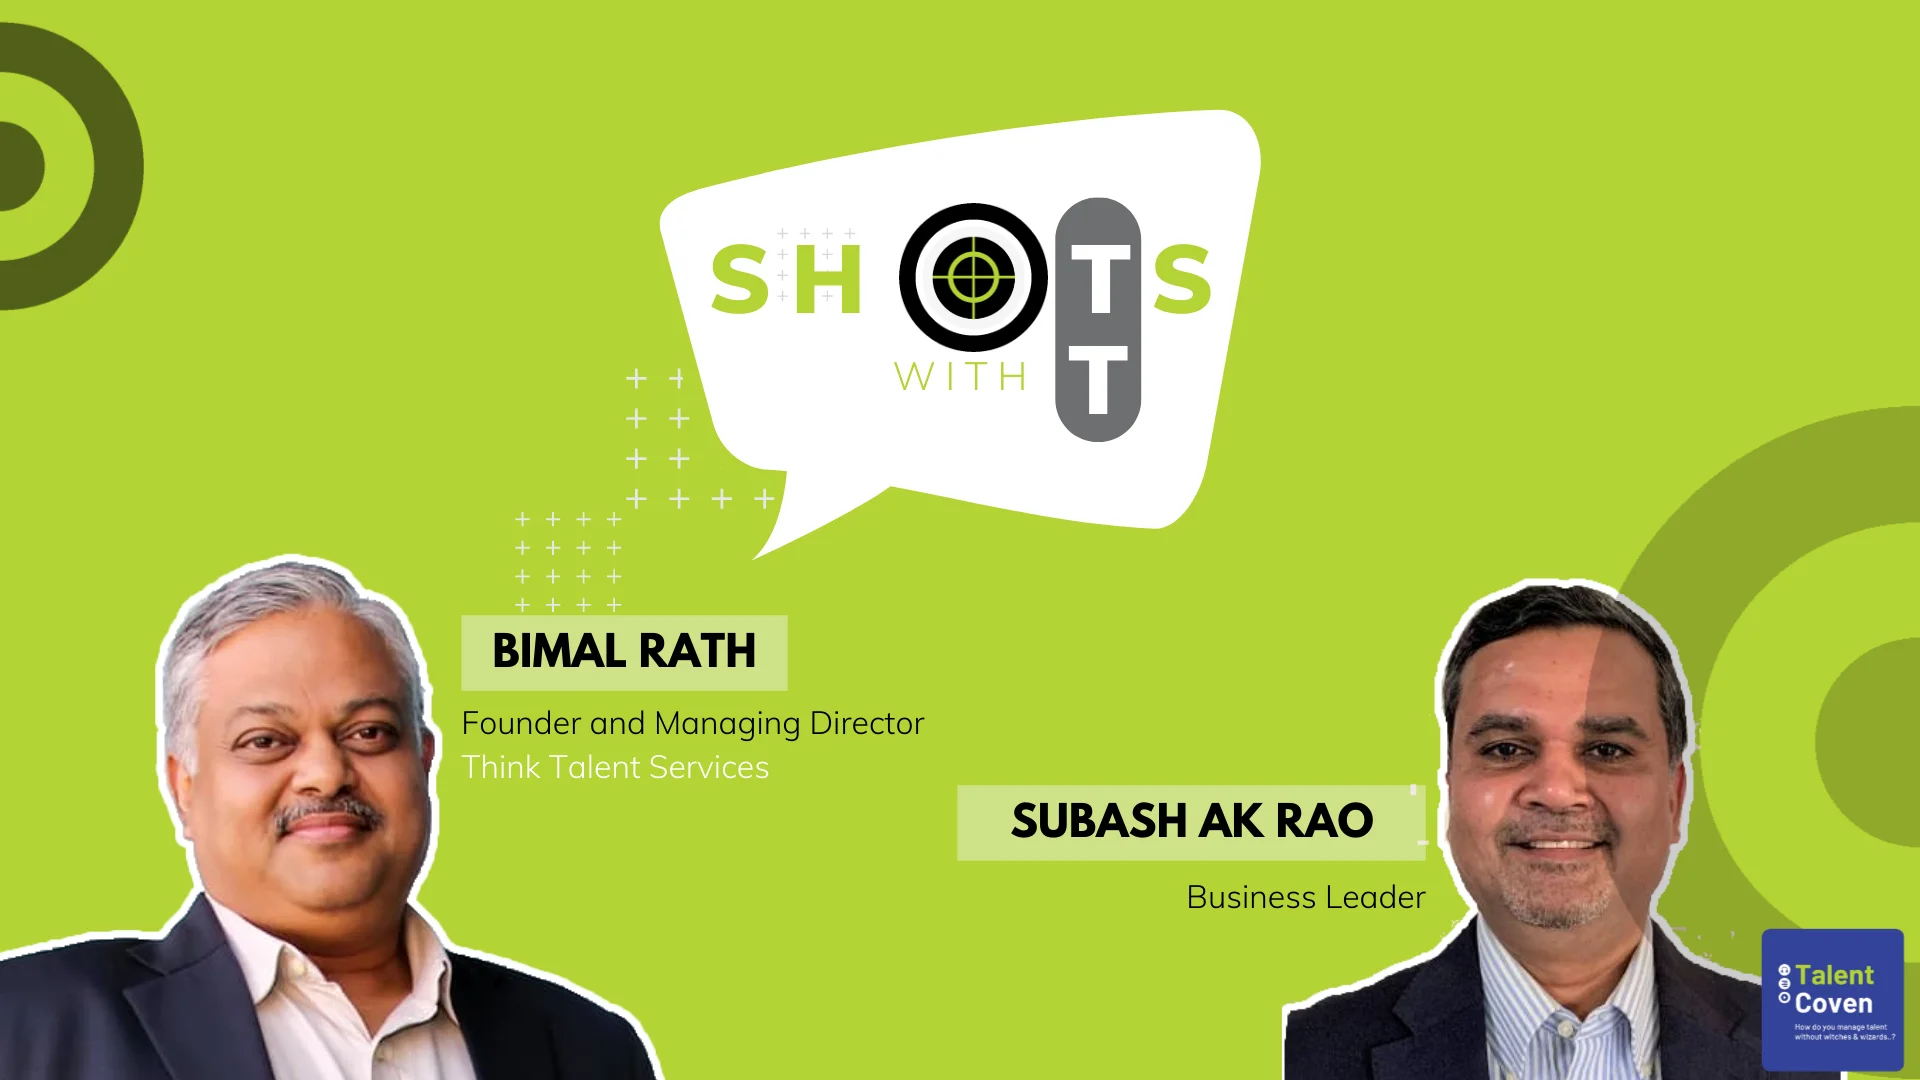 Podcast episode cover featuring Subash Ak Rao discussing Perspectives on HR impacts